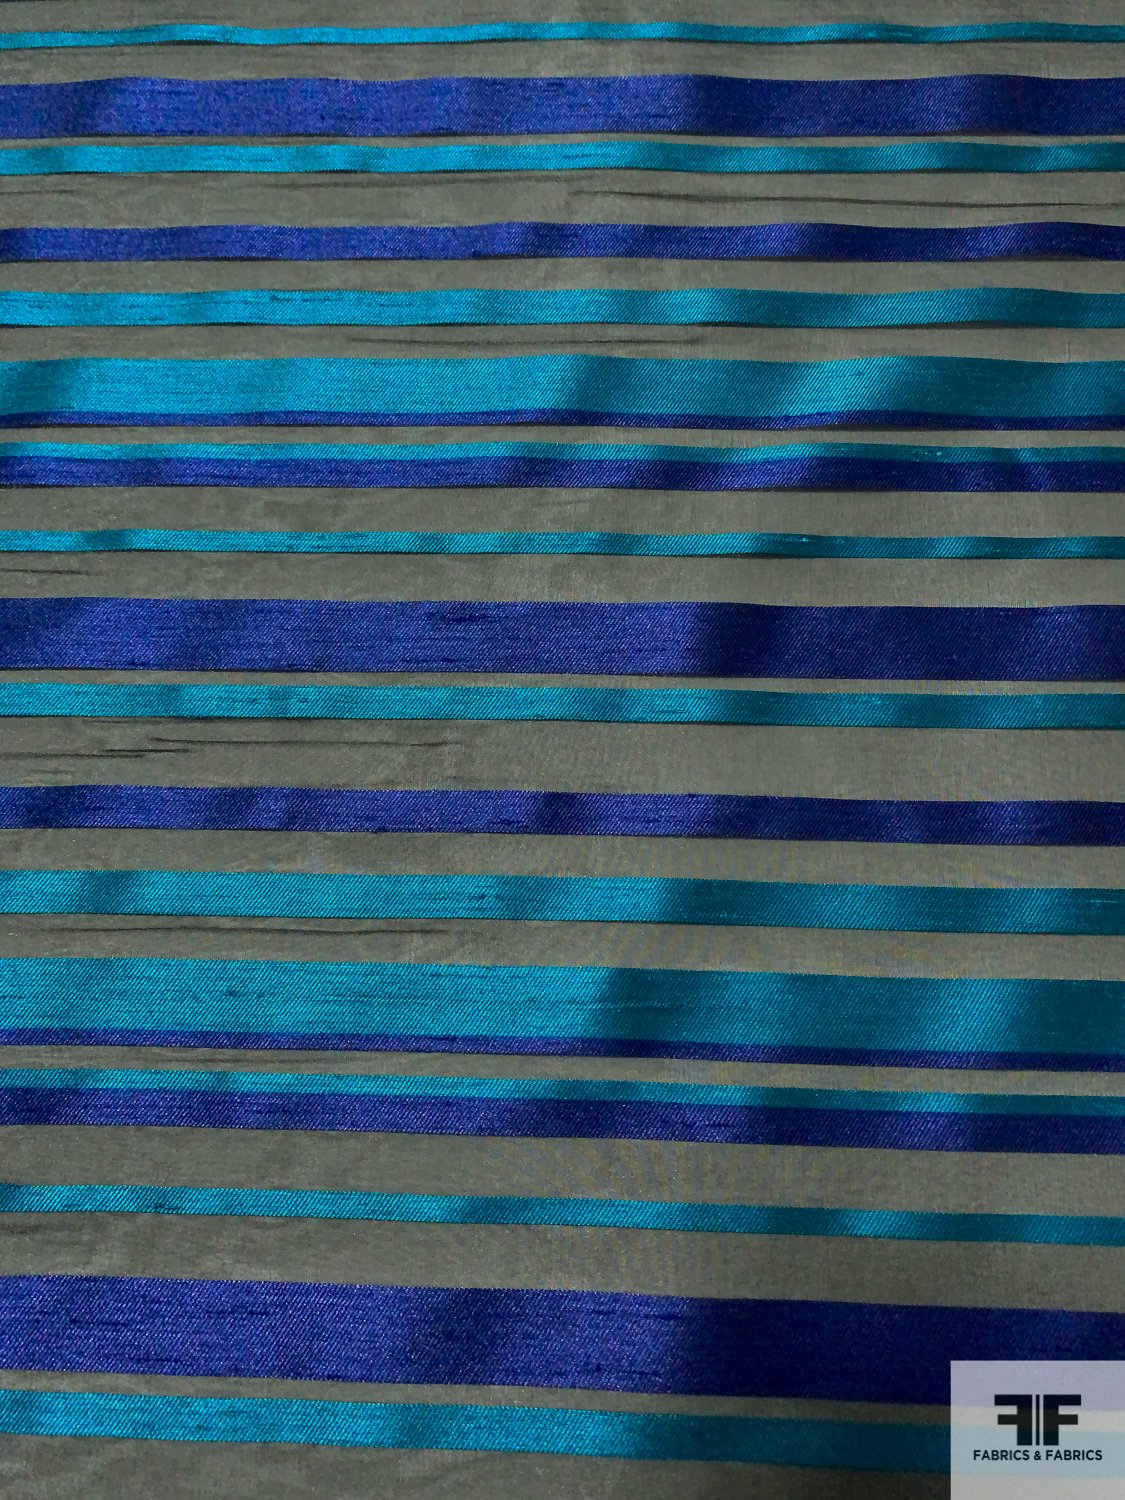 Italian Polyester Organza with Horizontal Twill Striped Design - Teal / Royal / Black